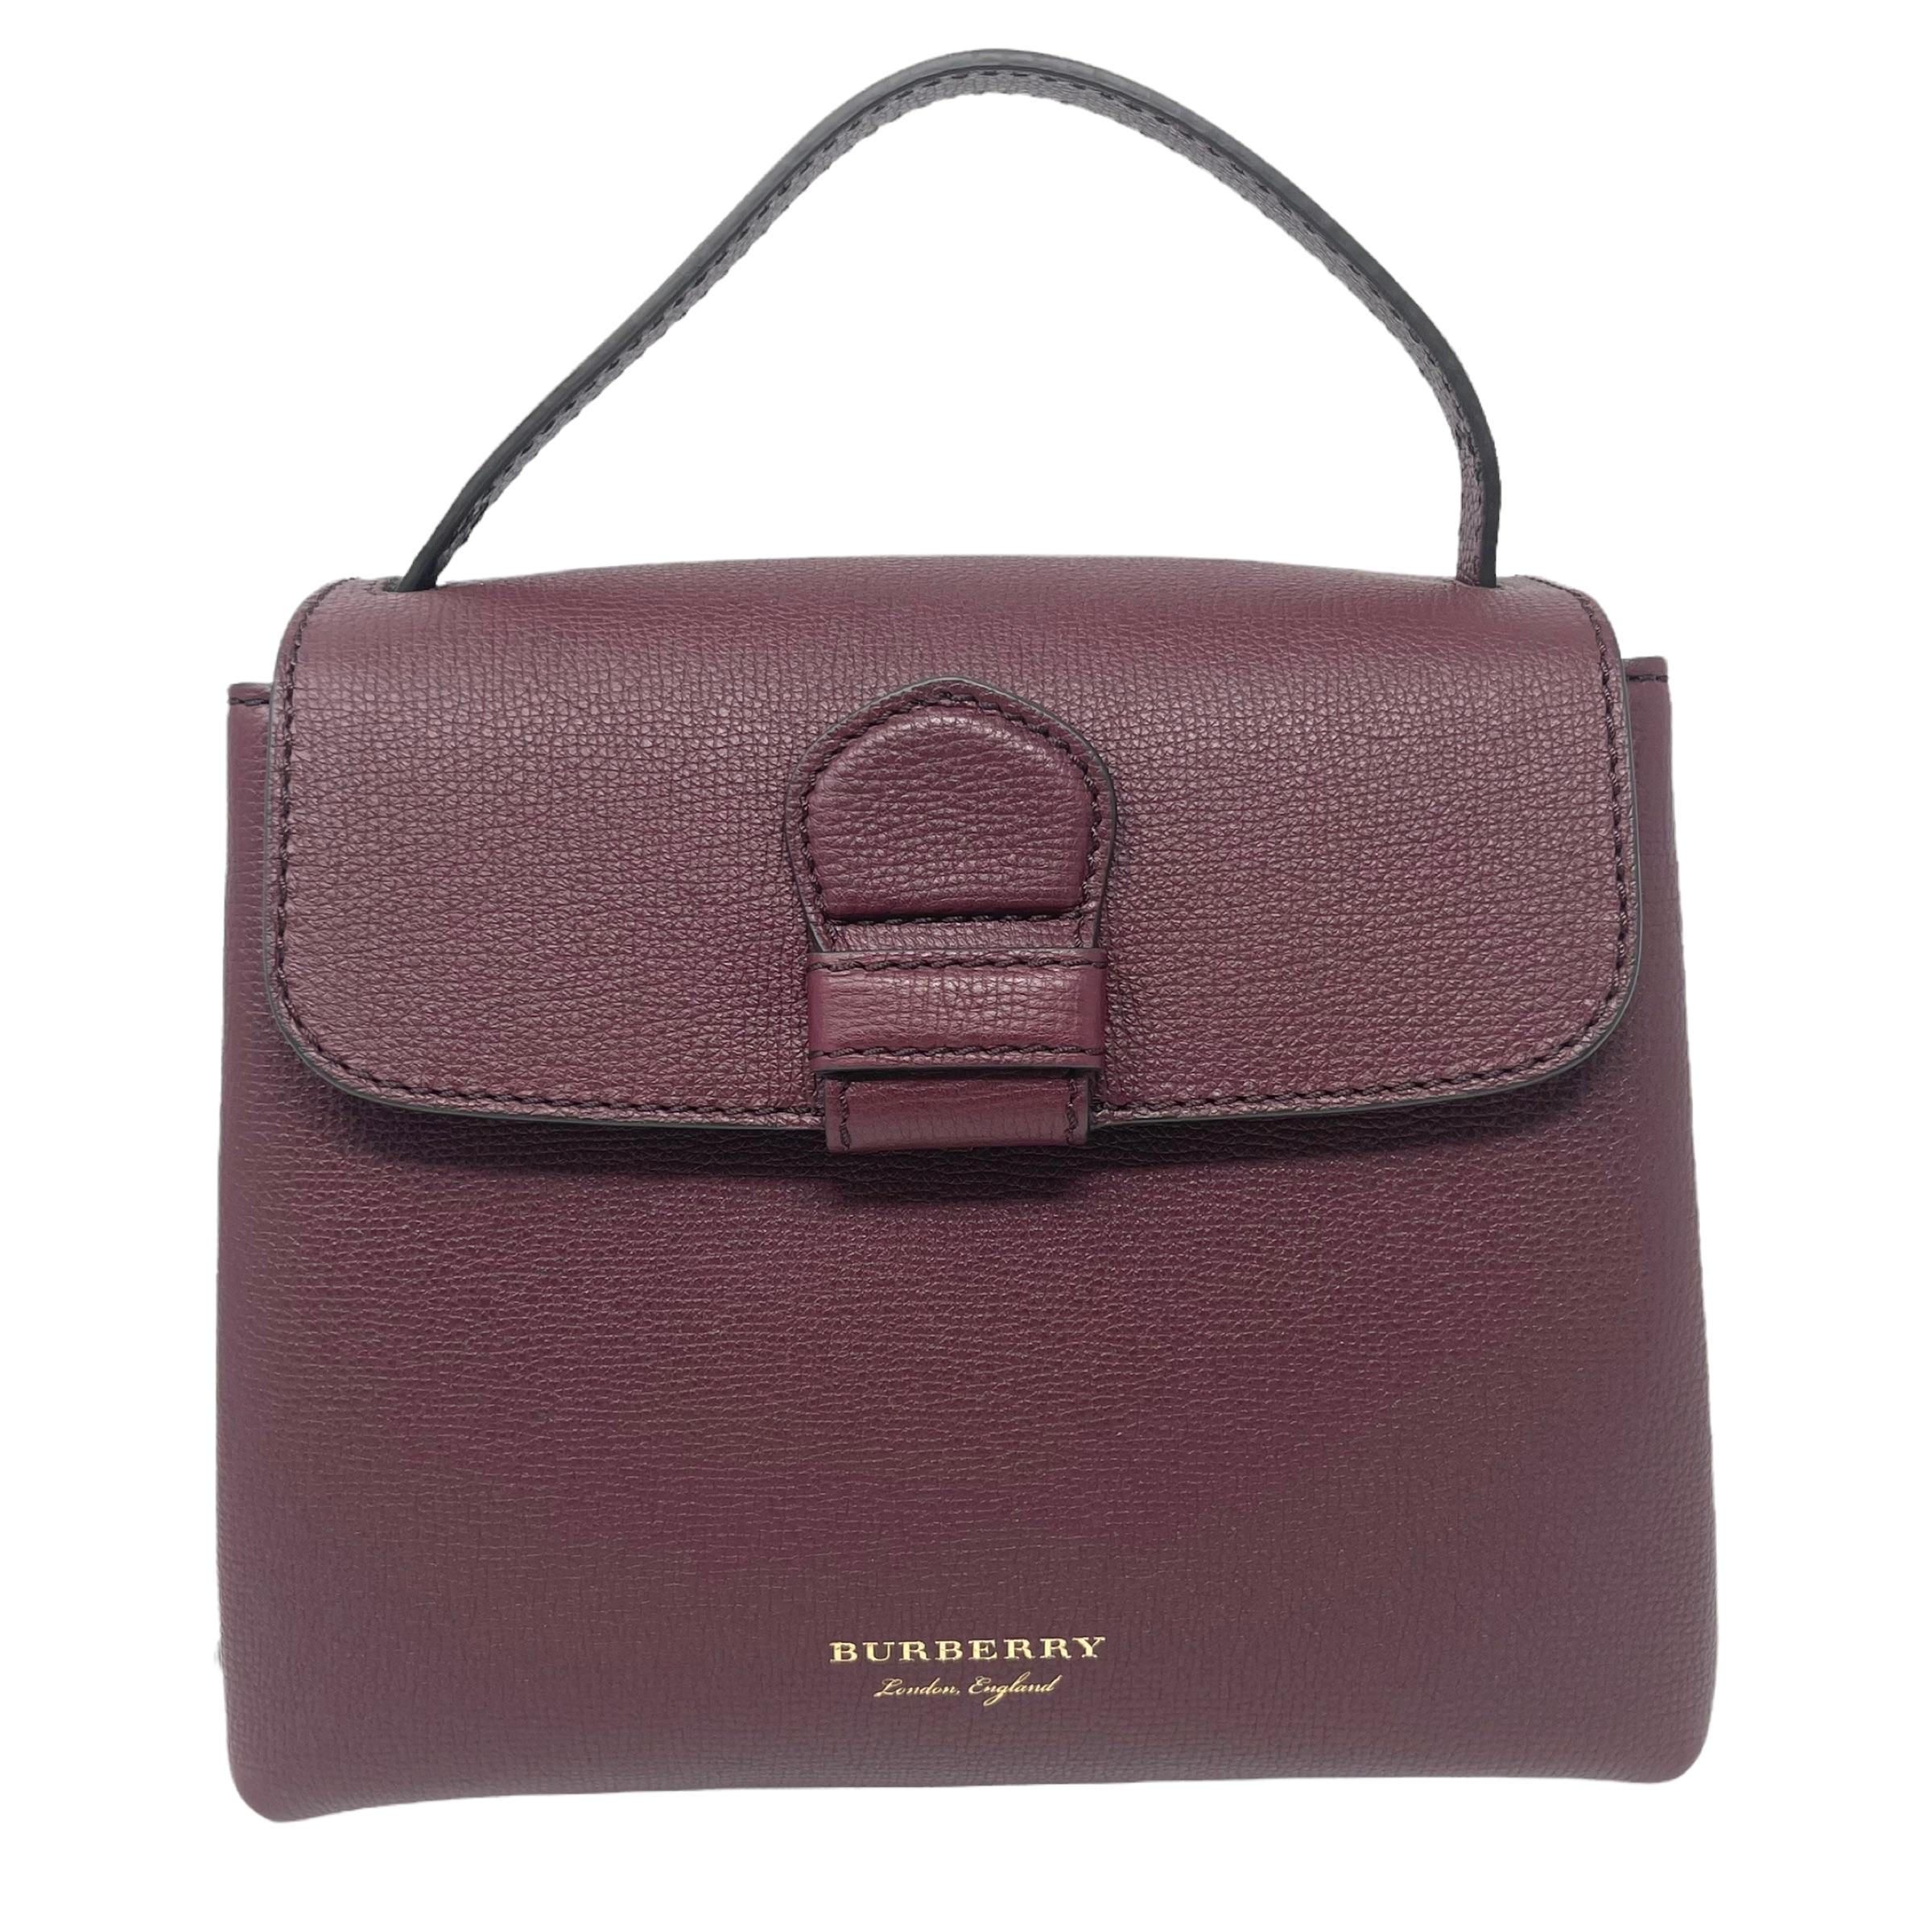 New Burberry Burgundy Small Camberley House Check Leather Crossbody Bag

Authenticity Guaranteed

DETAILS
Brand: Burberry
Condition: Brand new
Gender: Women
Category: Crossbody bag
Color: Burgundy
Material: Leather
Gold-tone hardware
Removable and